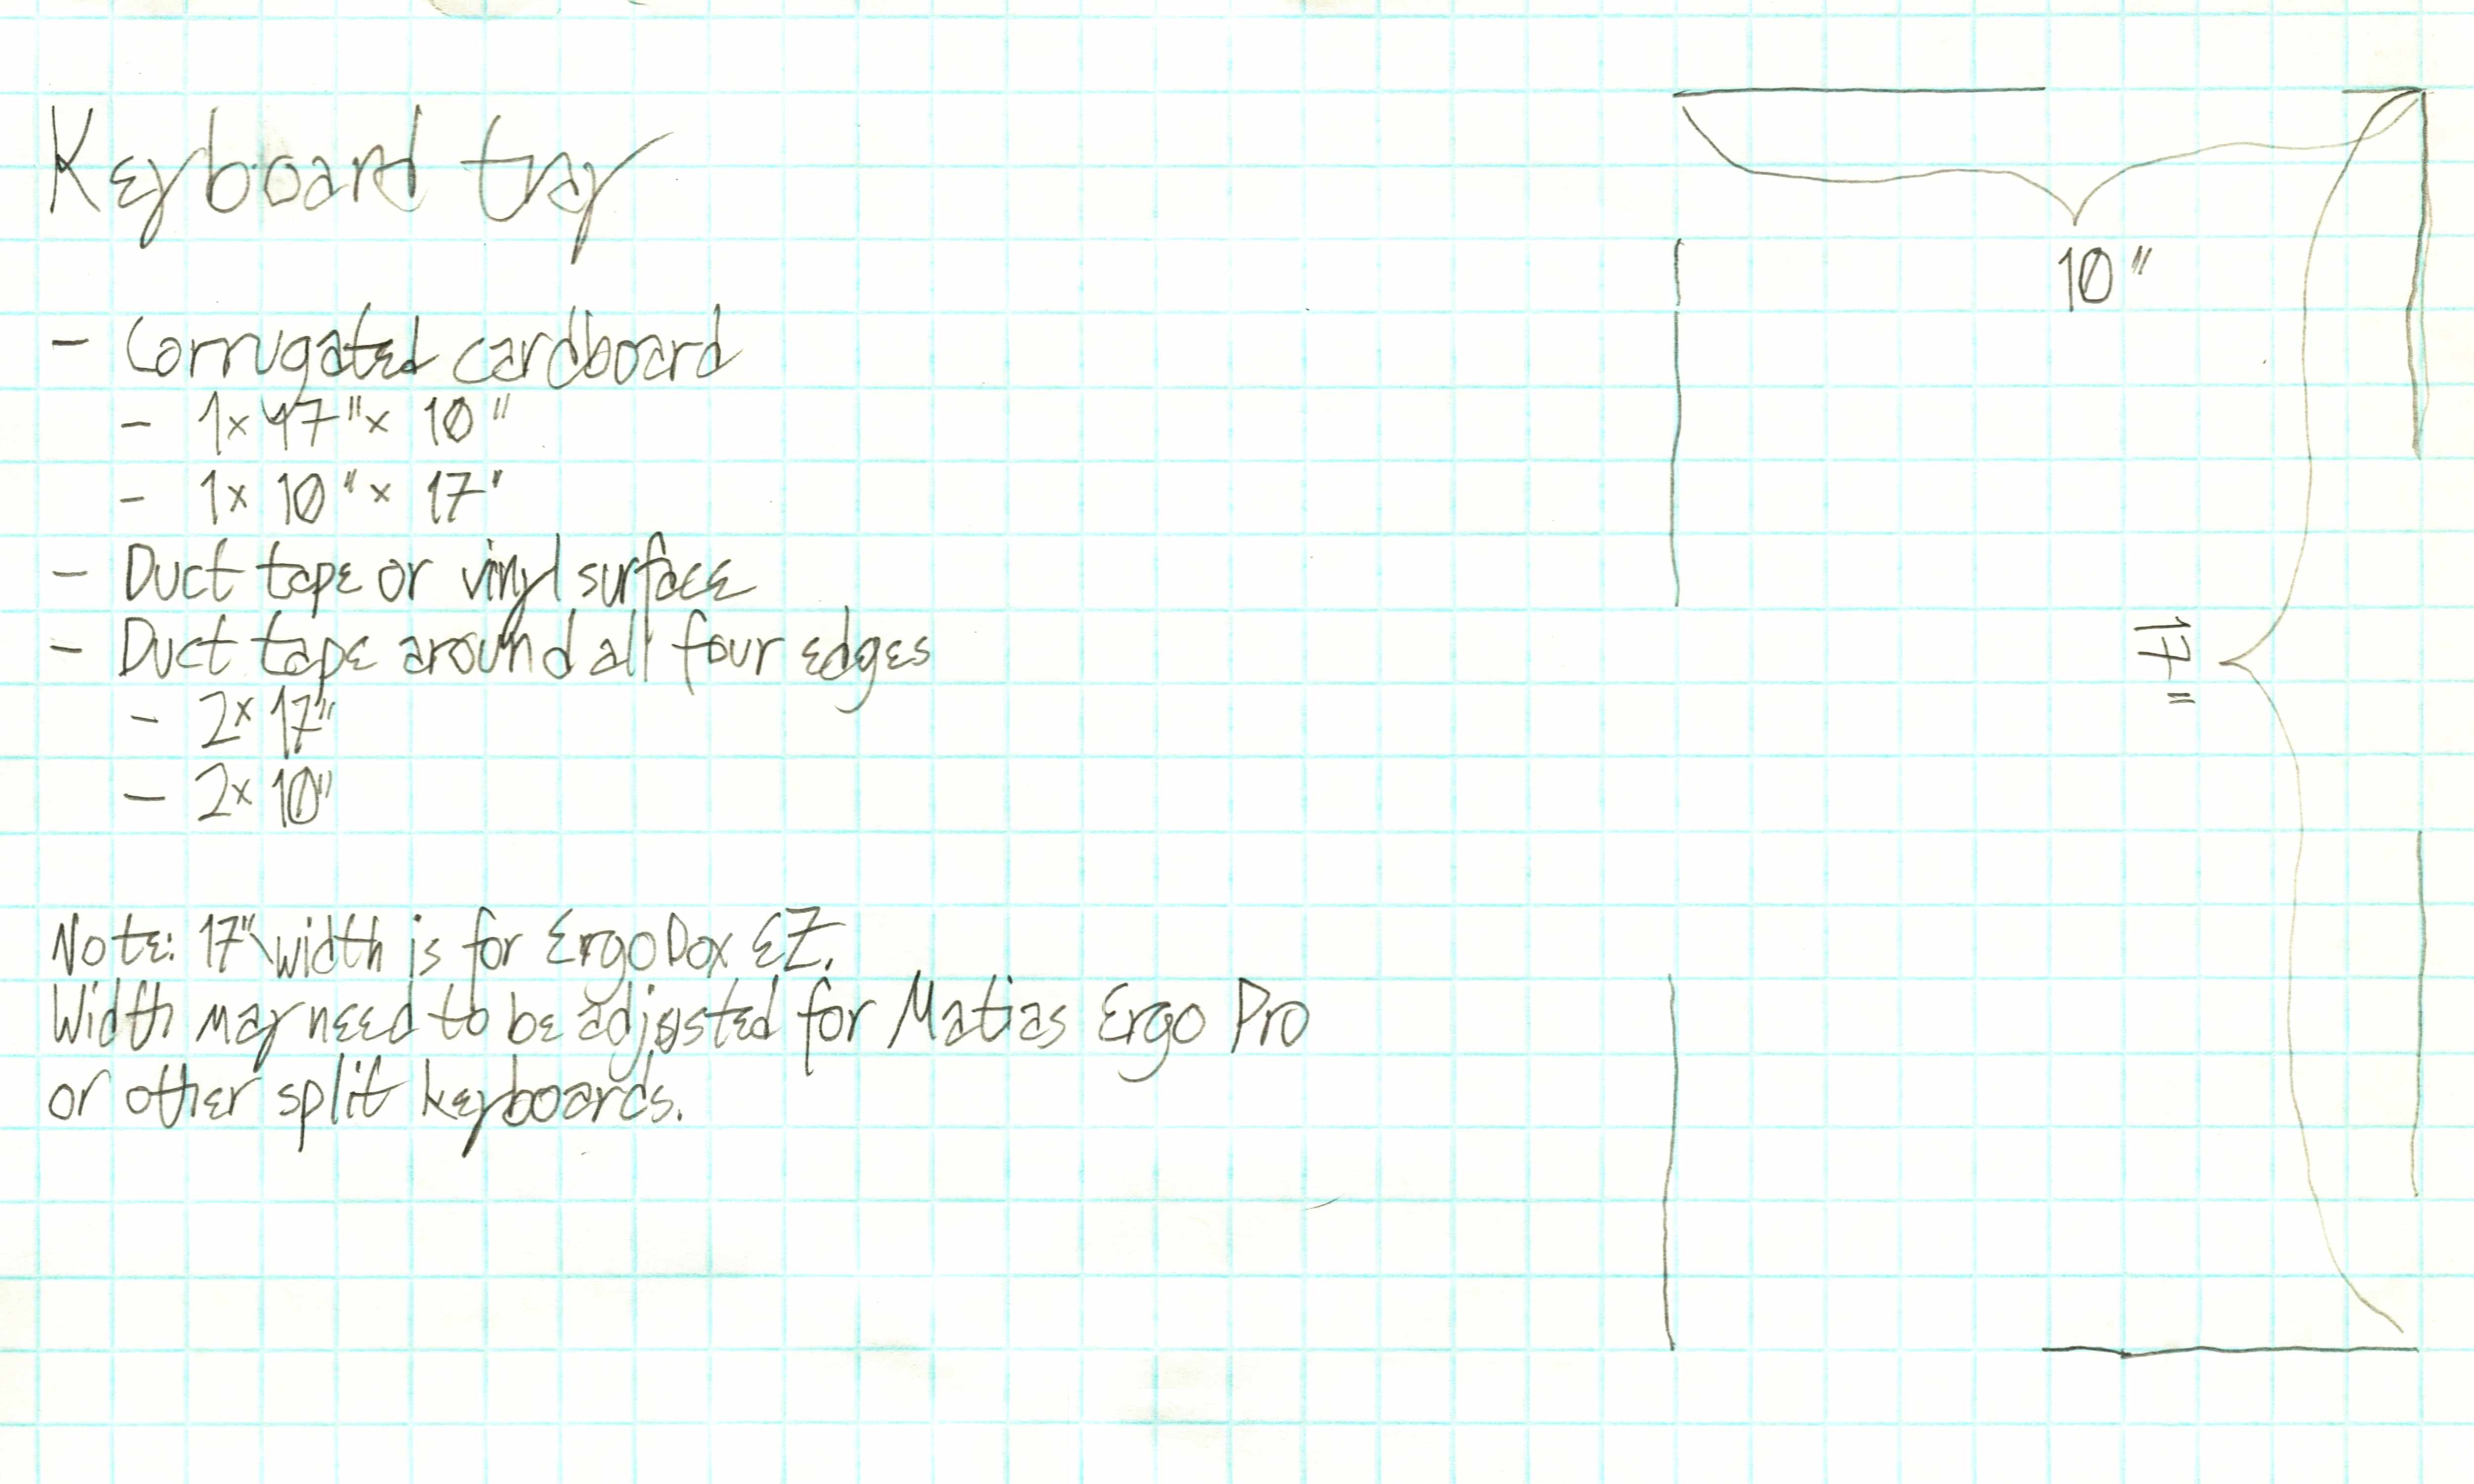 Scan of the measurements on graph paper for the project, along with a bill of materials consisting of two sheets of cardboard (one 17 by 10, the other 10 by 17), plus white duct tape or vinyl for the surface and duct tape for the edges.